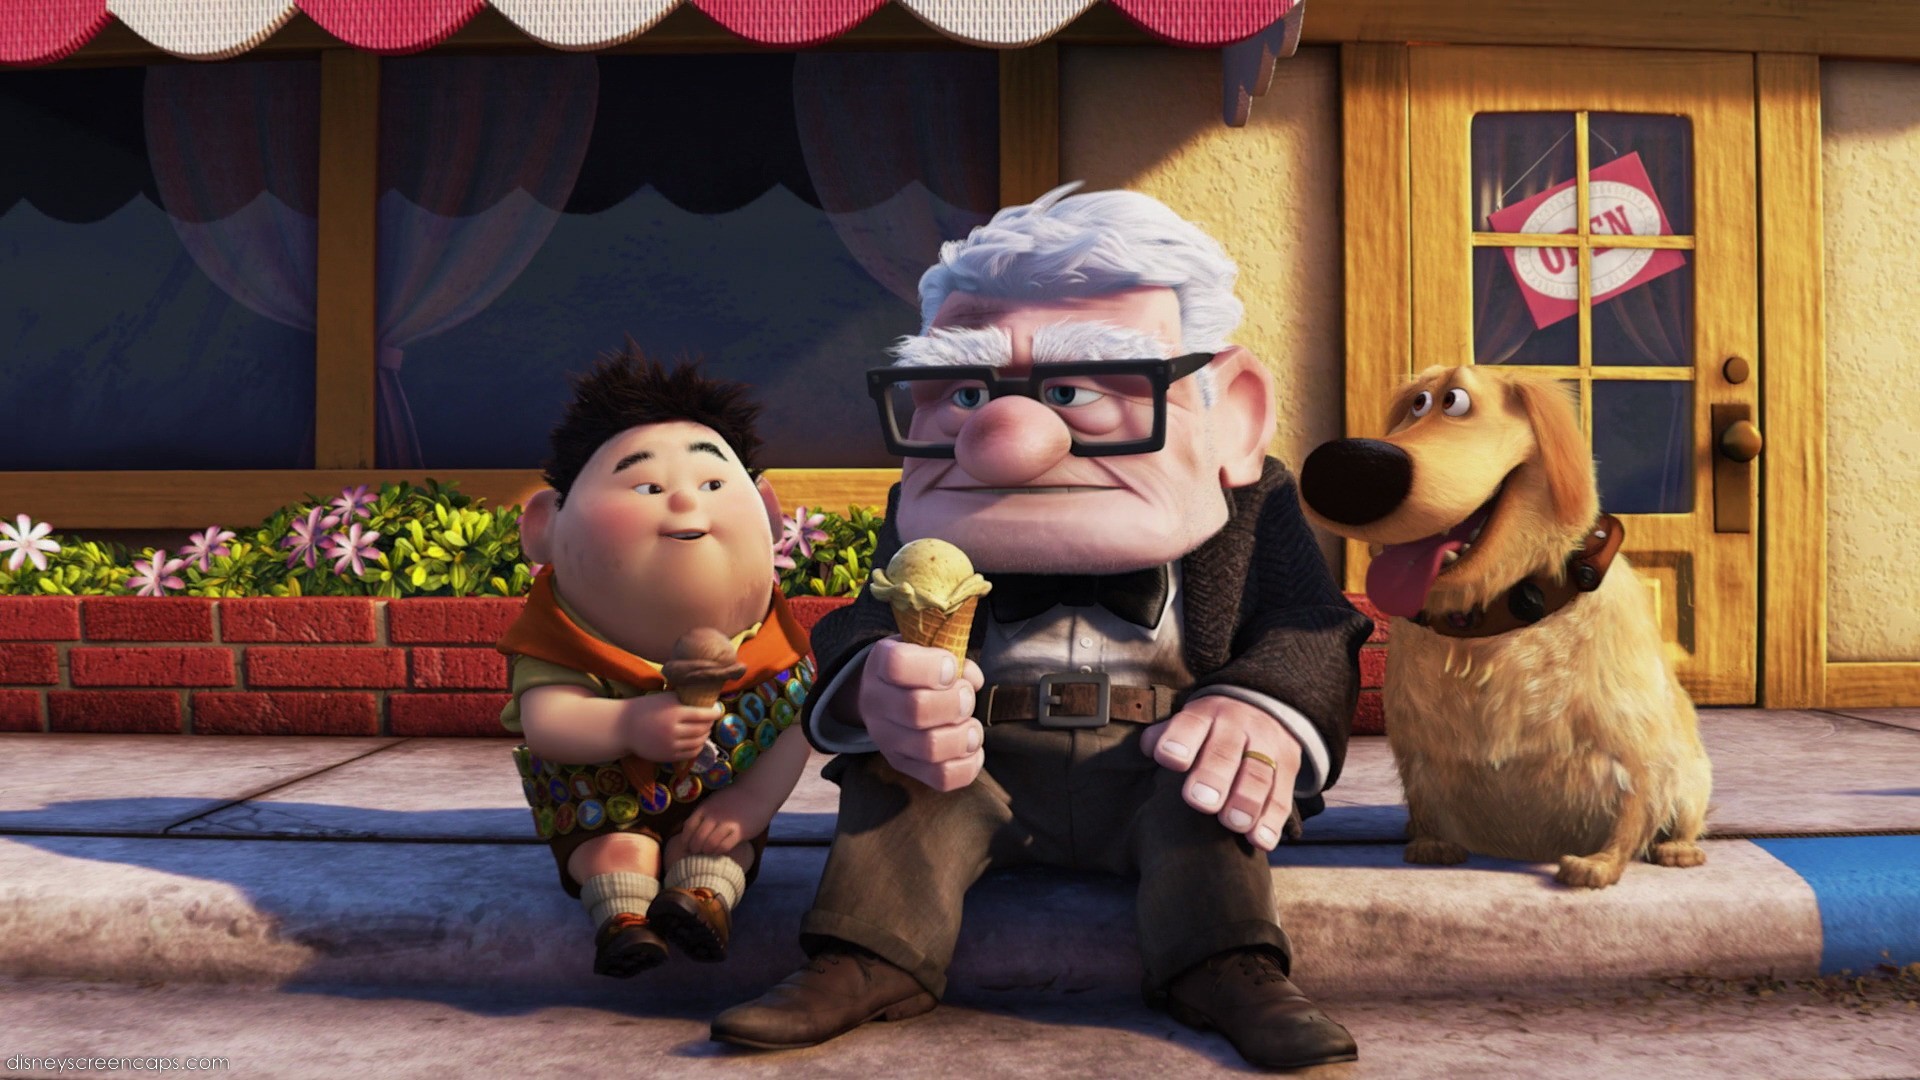 Best Fictional Dads - Carl - Up